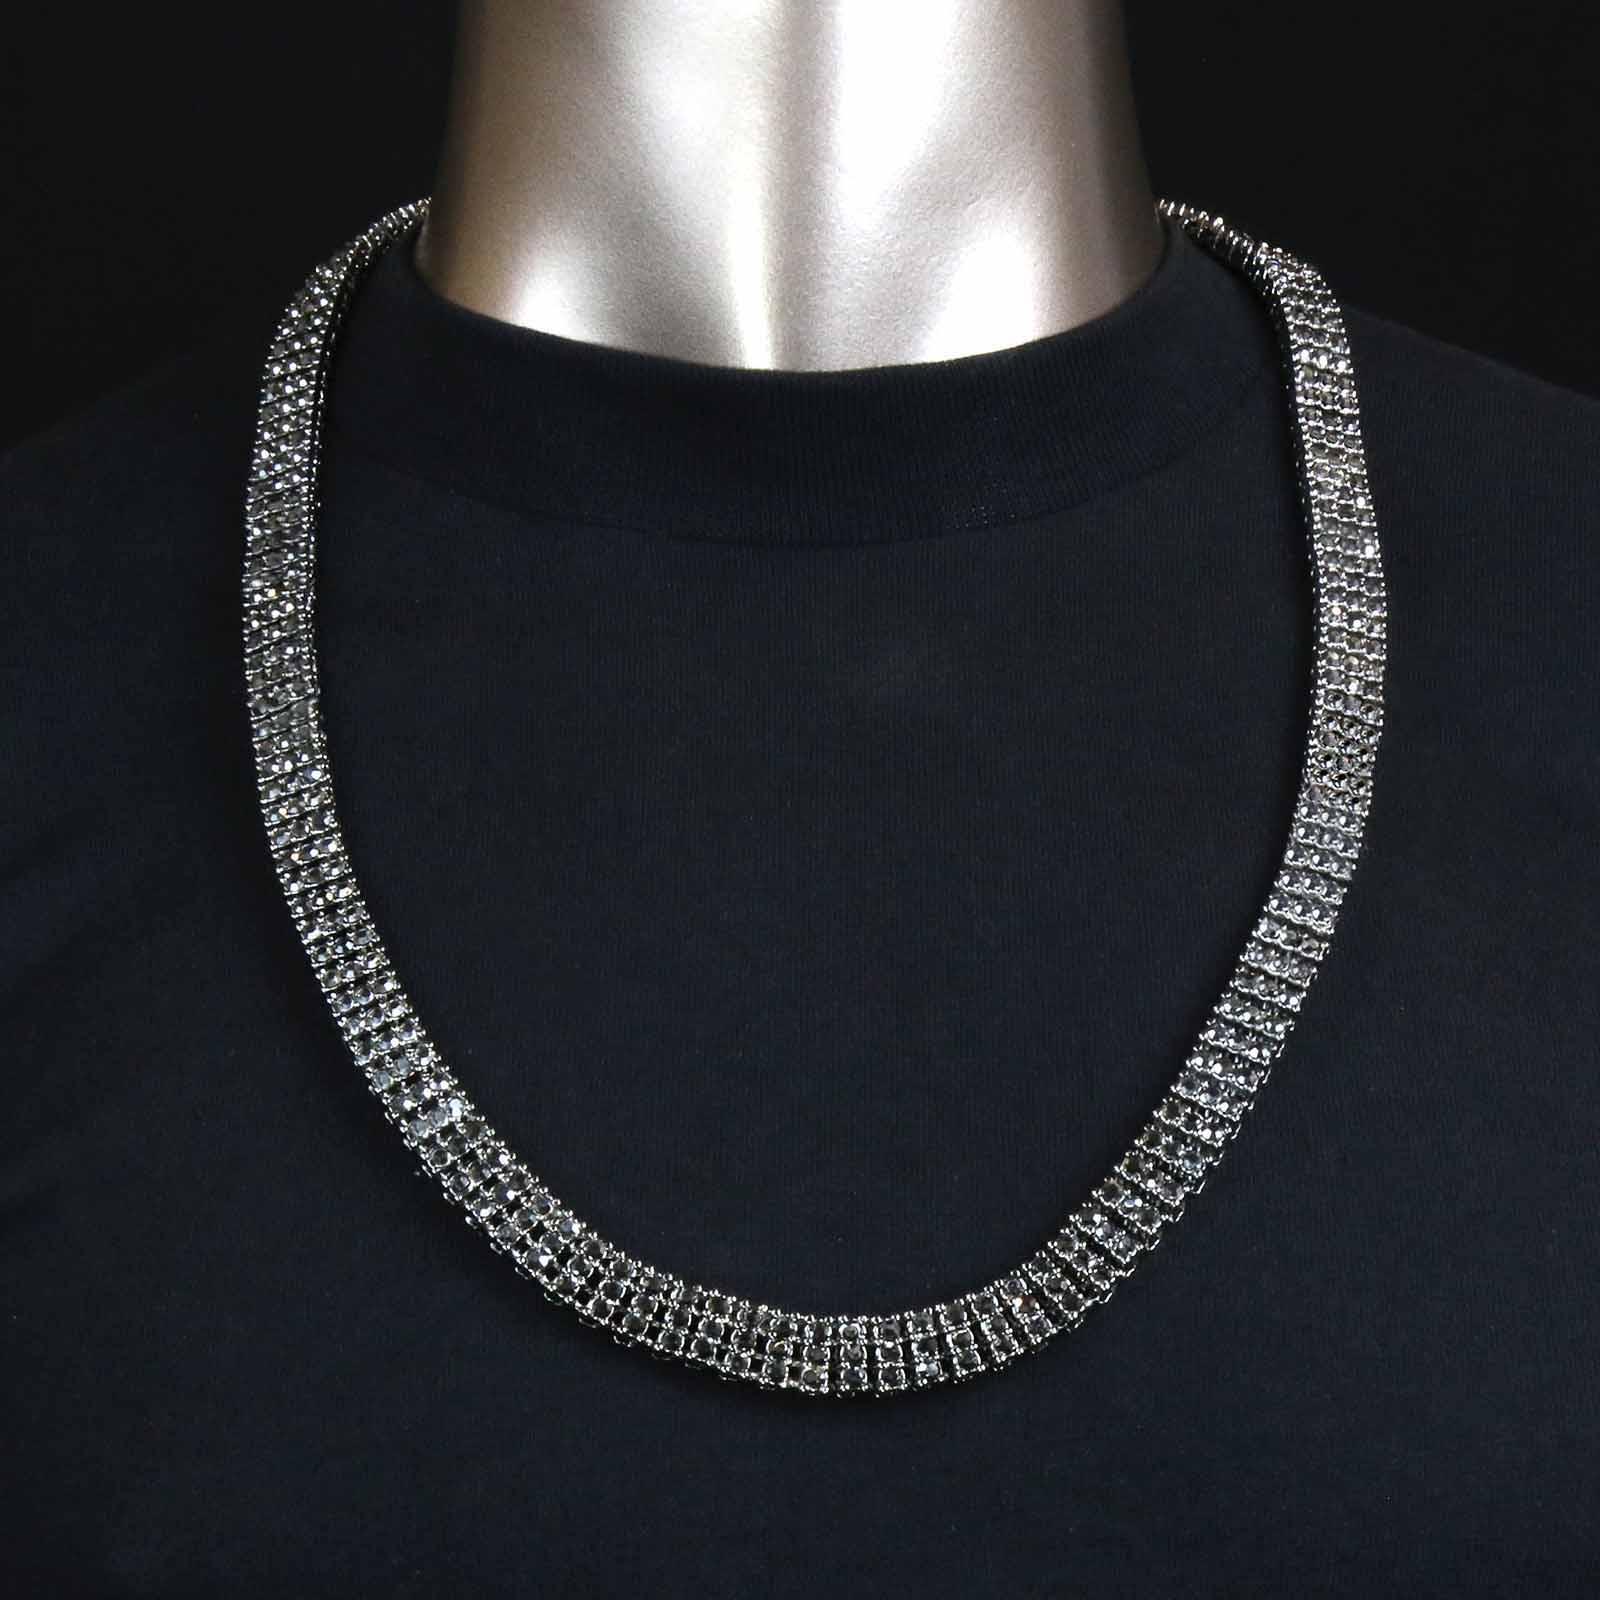 3 ROW ICED-OUT TENNIS HEMATITE CHAIN 30"